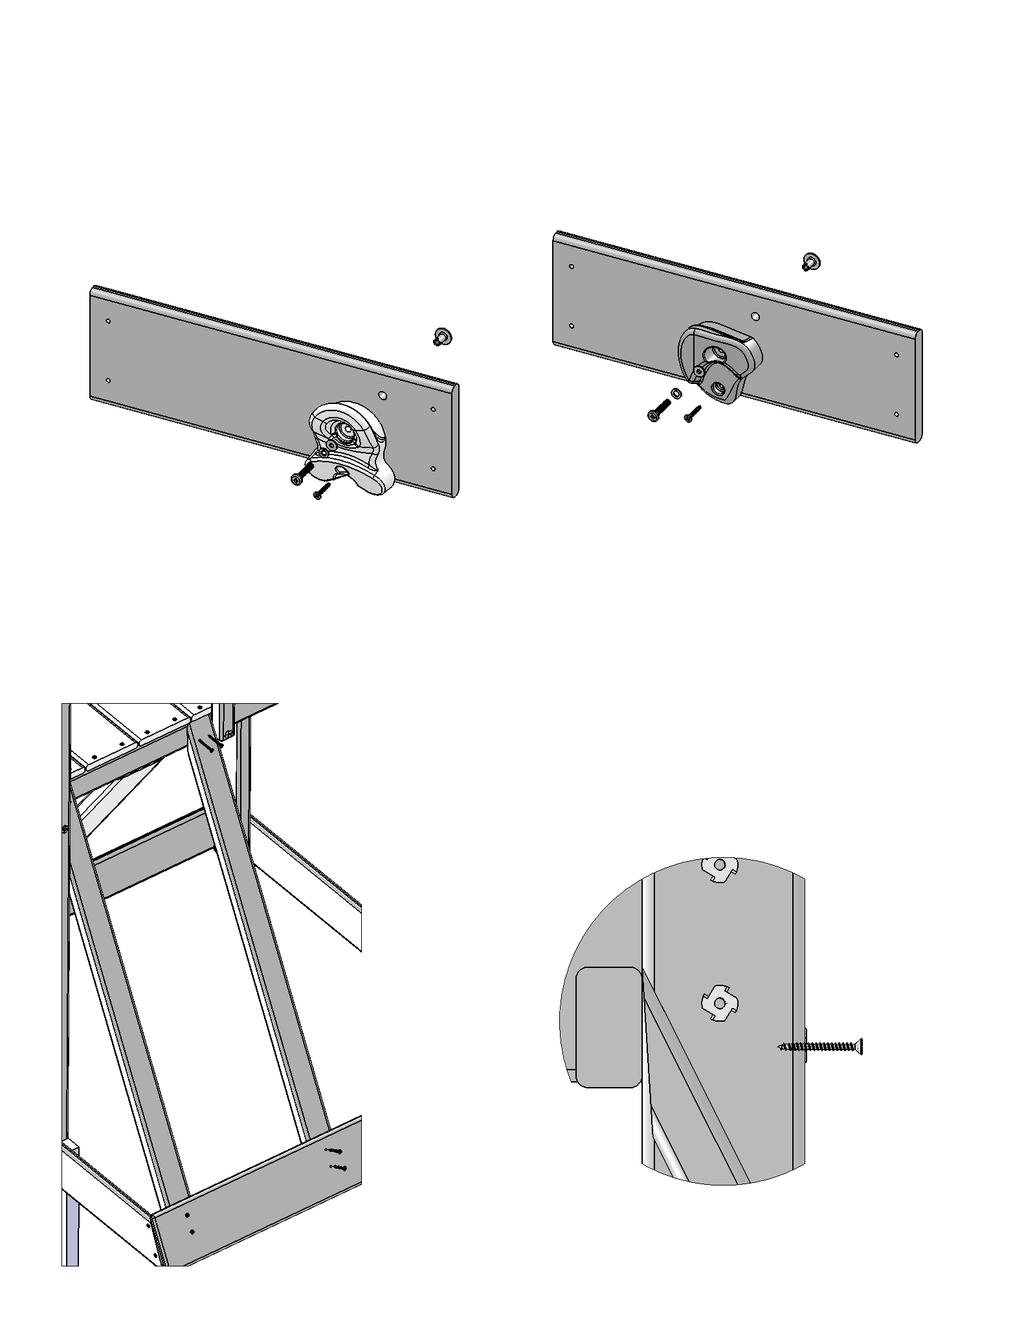 2) B: Attach (1779) CE Access Board to the top of each (1765) Rock Rail as shown in fig. 20.3. Make sure (1779) CE Access Board is flush to the outside and top edges of each Rock Rail.